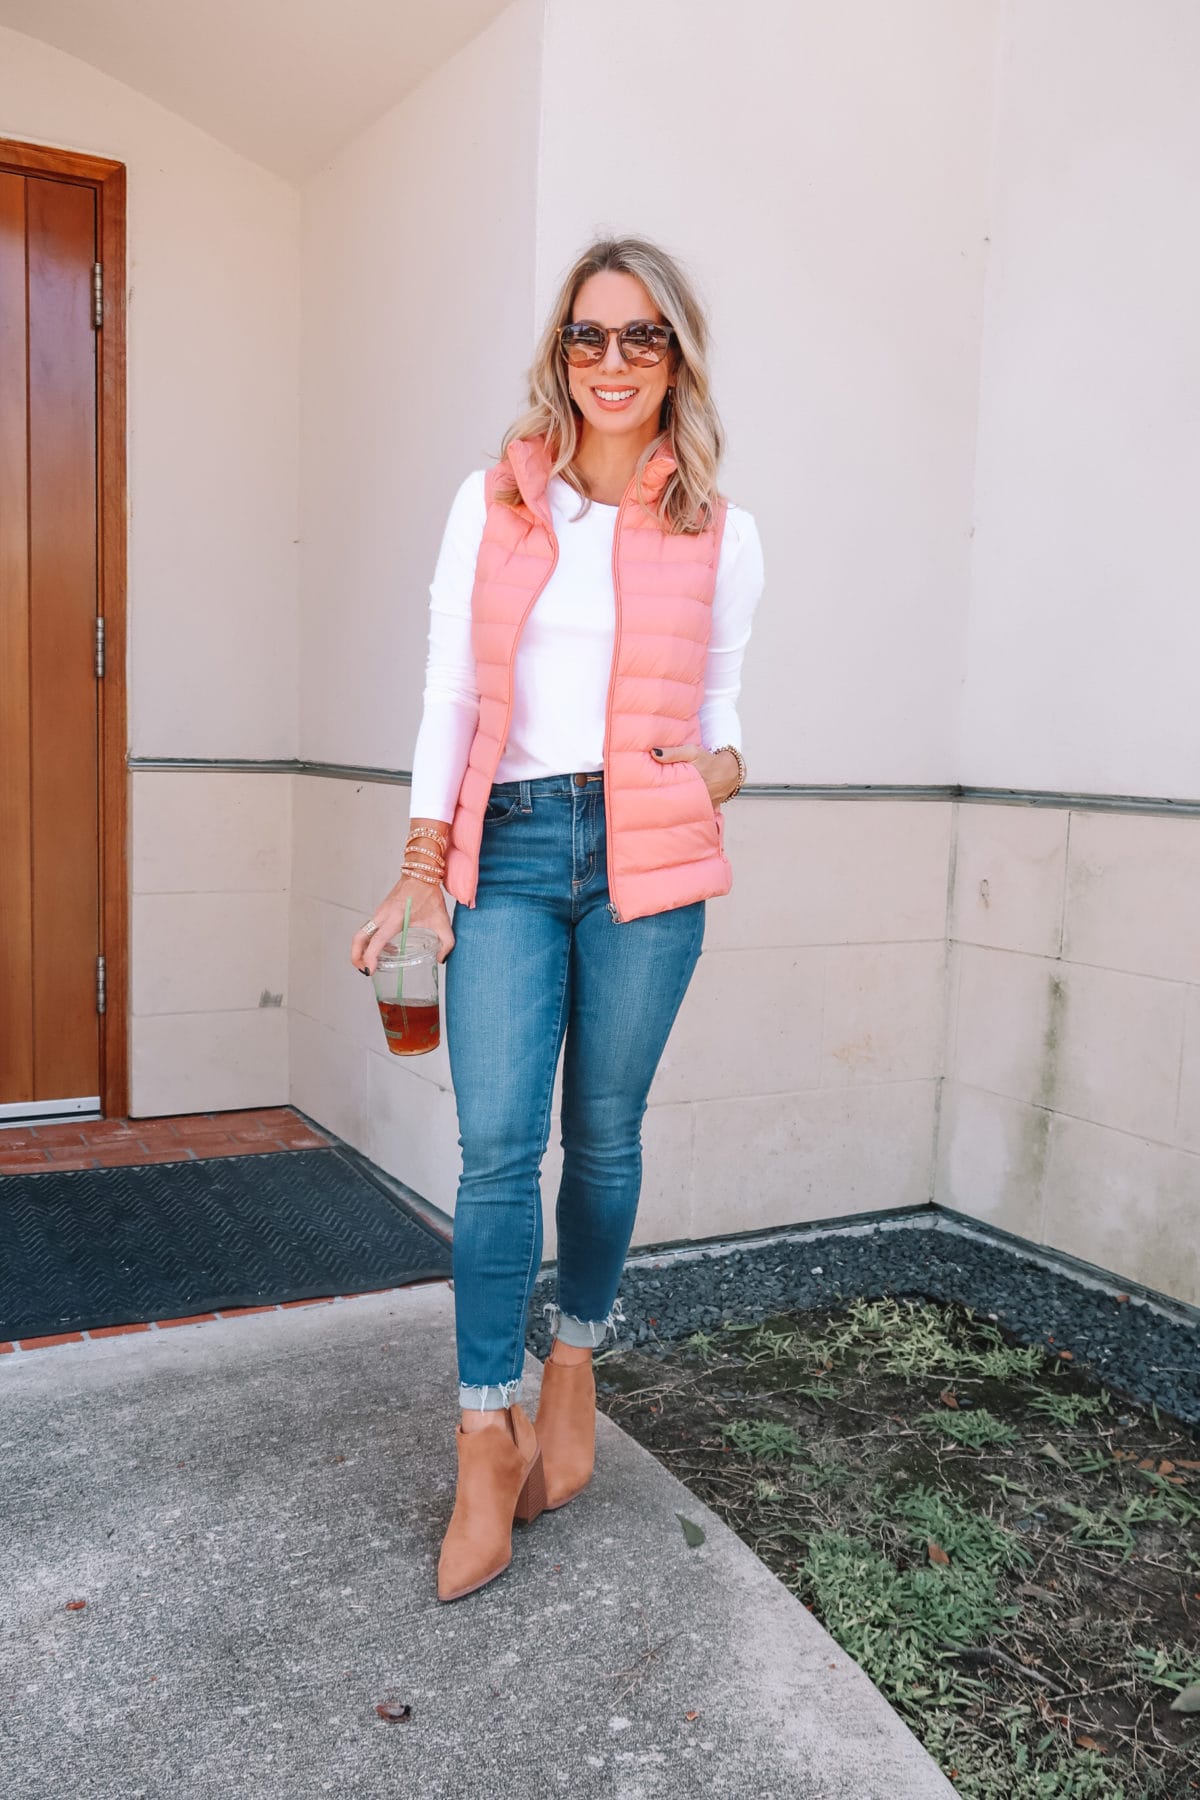 Outfits Lately, White Tee, Puff Vest, Jeans, Booties